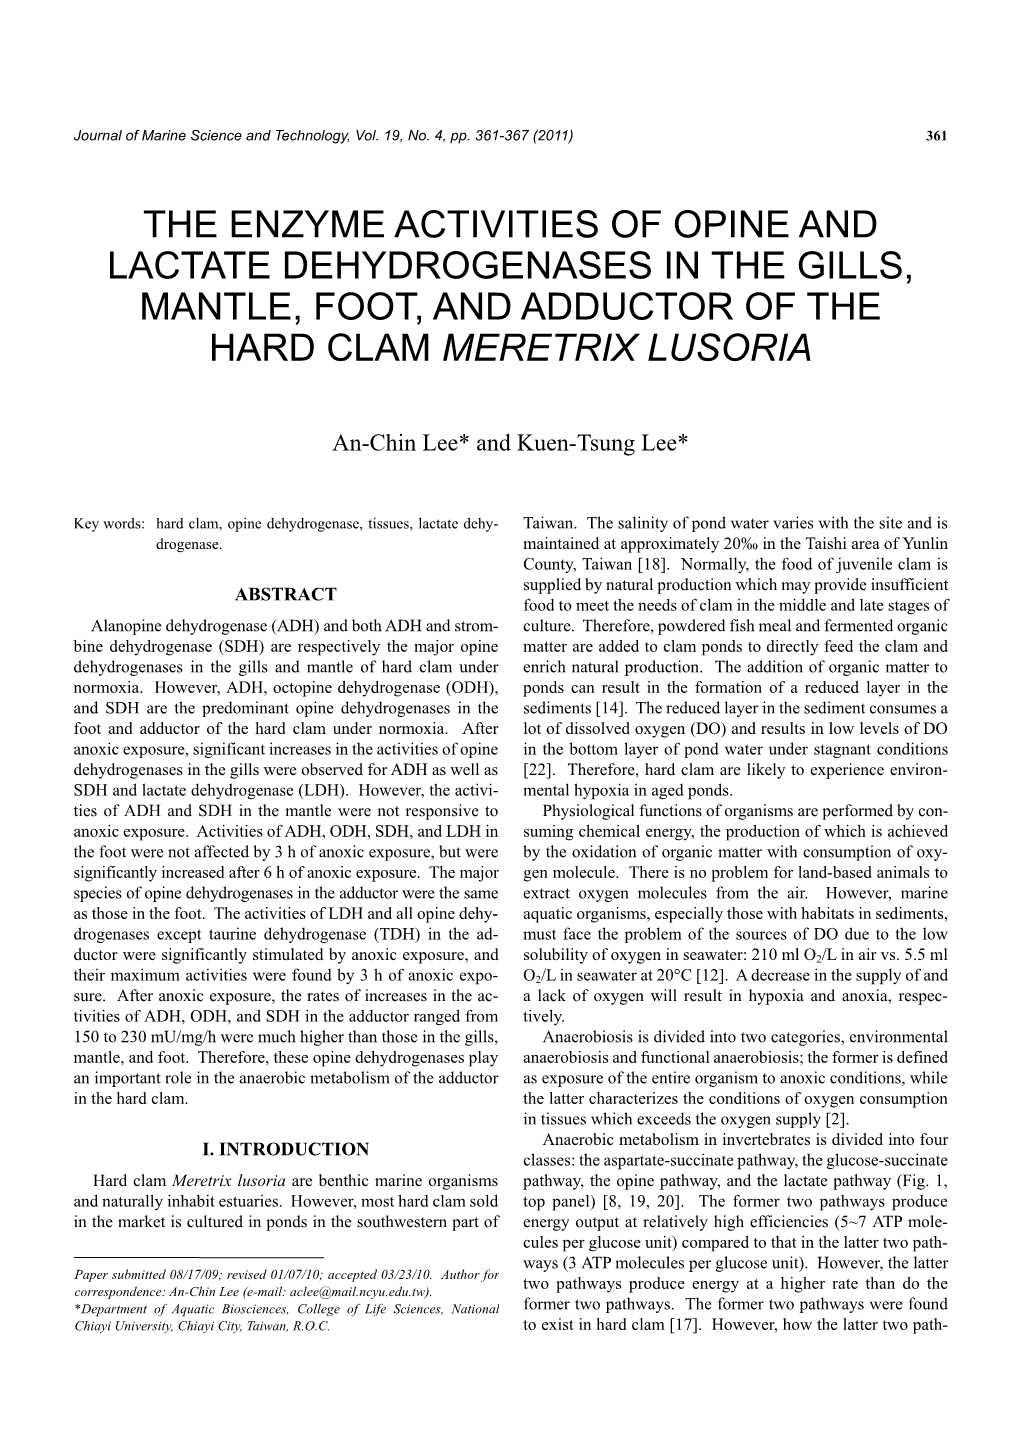 The Enzyme Activities of Opine and Lactate Dehydrogenases in the Gills, Mantle, Foot, and Adductor of the Hard Clam Meretrix Lusoria